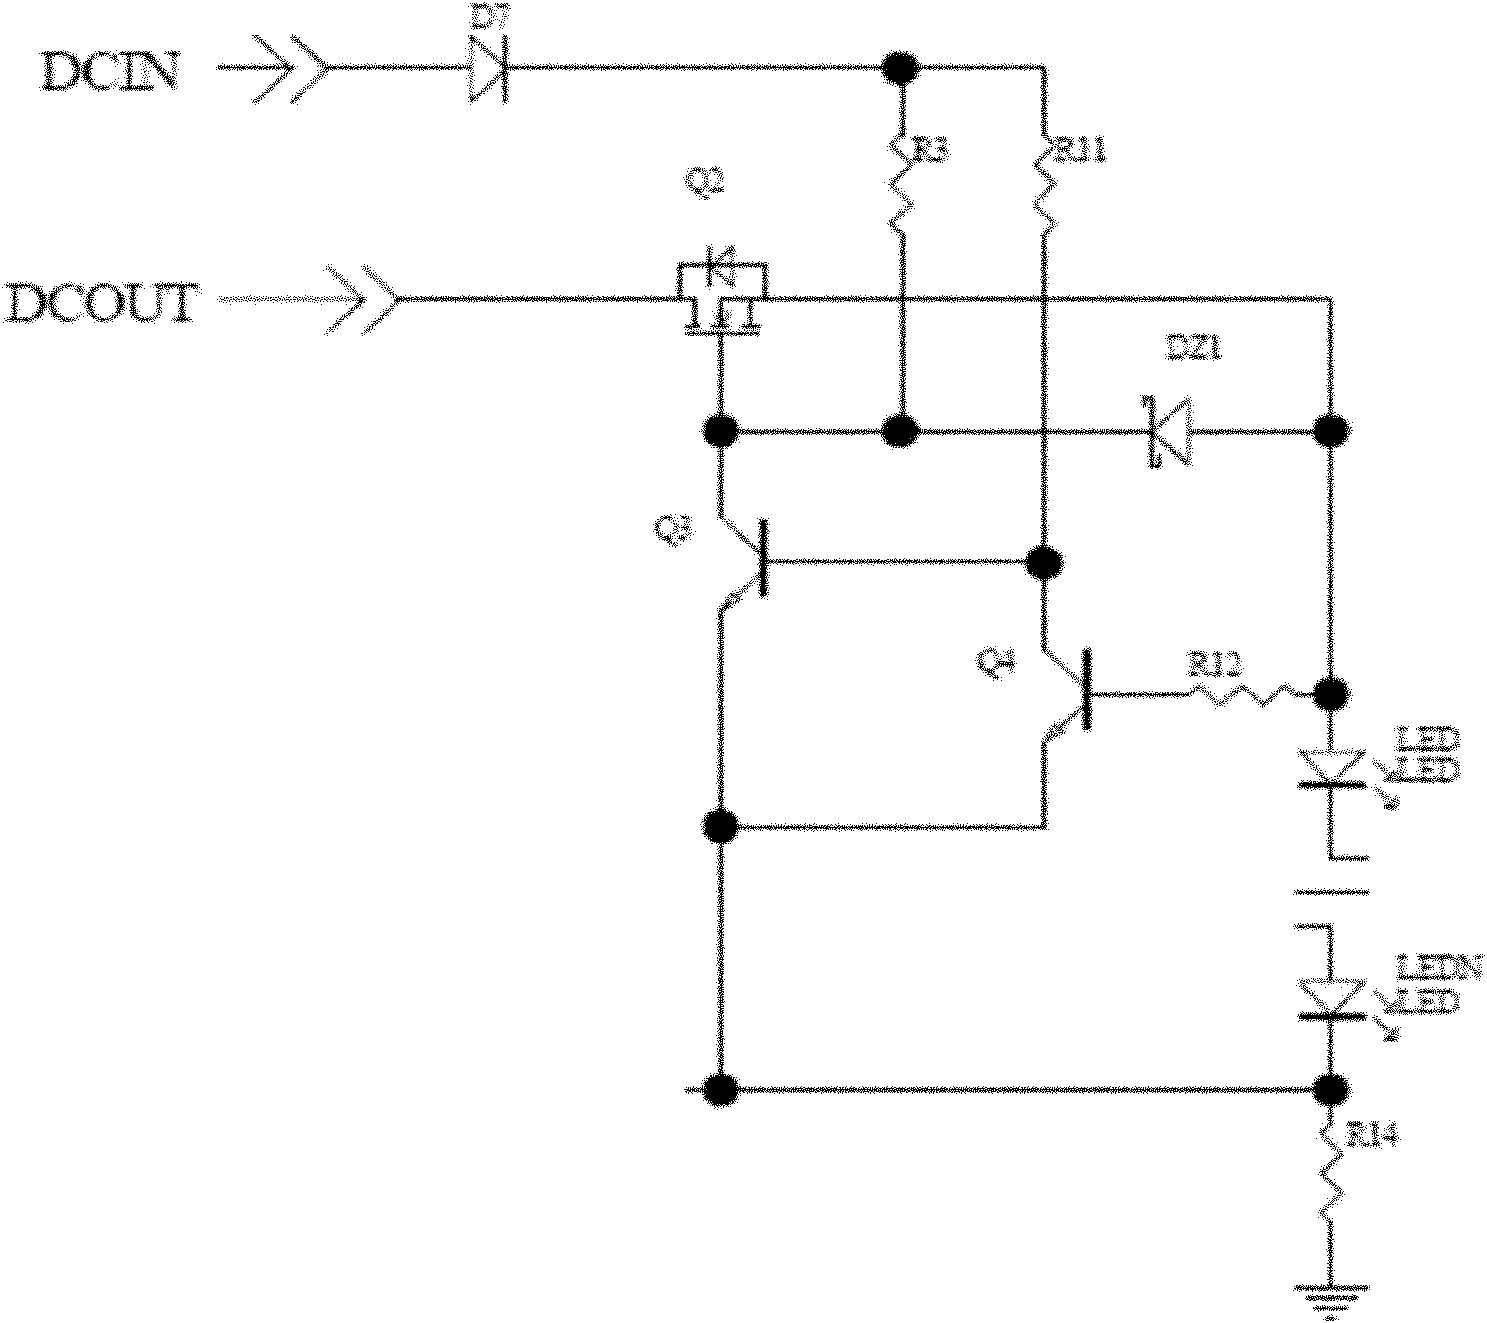 Practical and efficient LED drive circuit